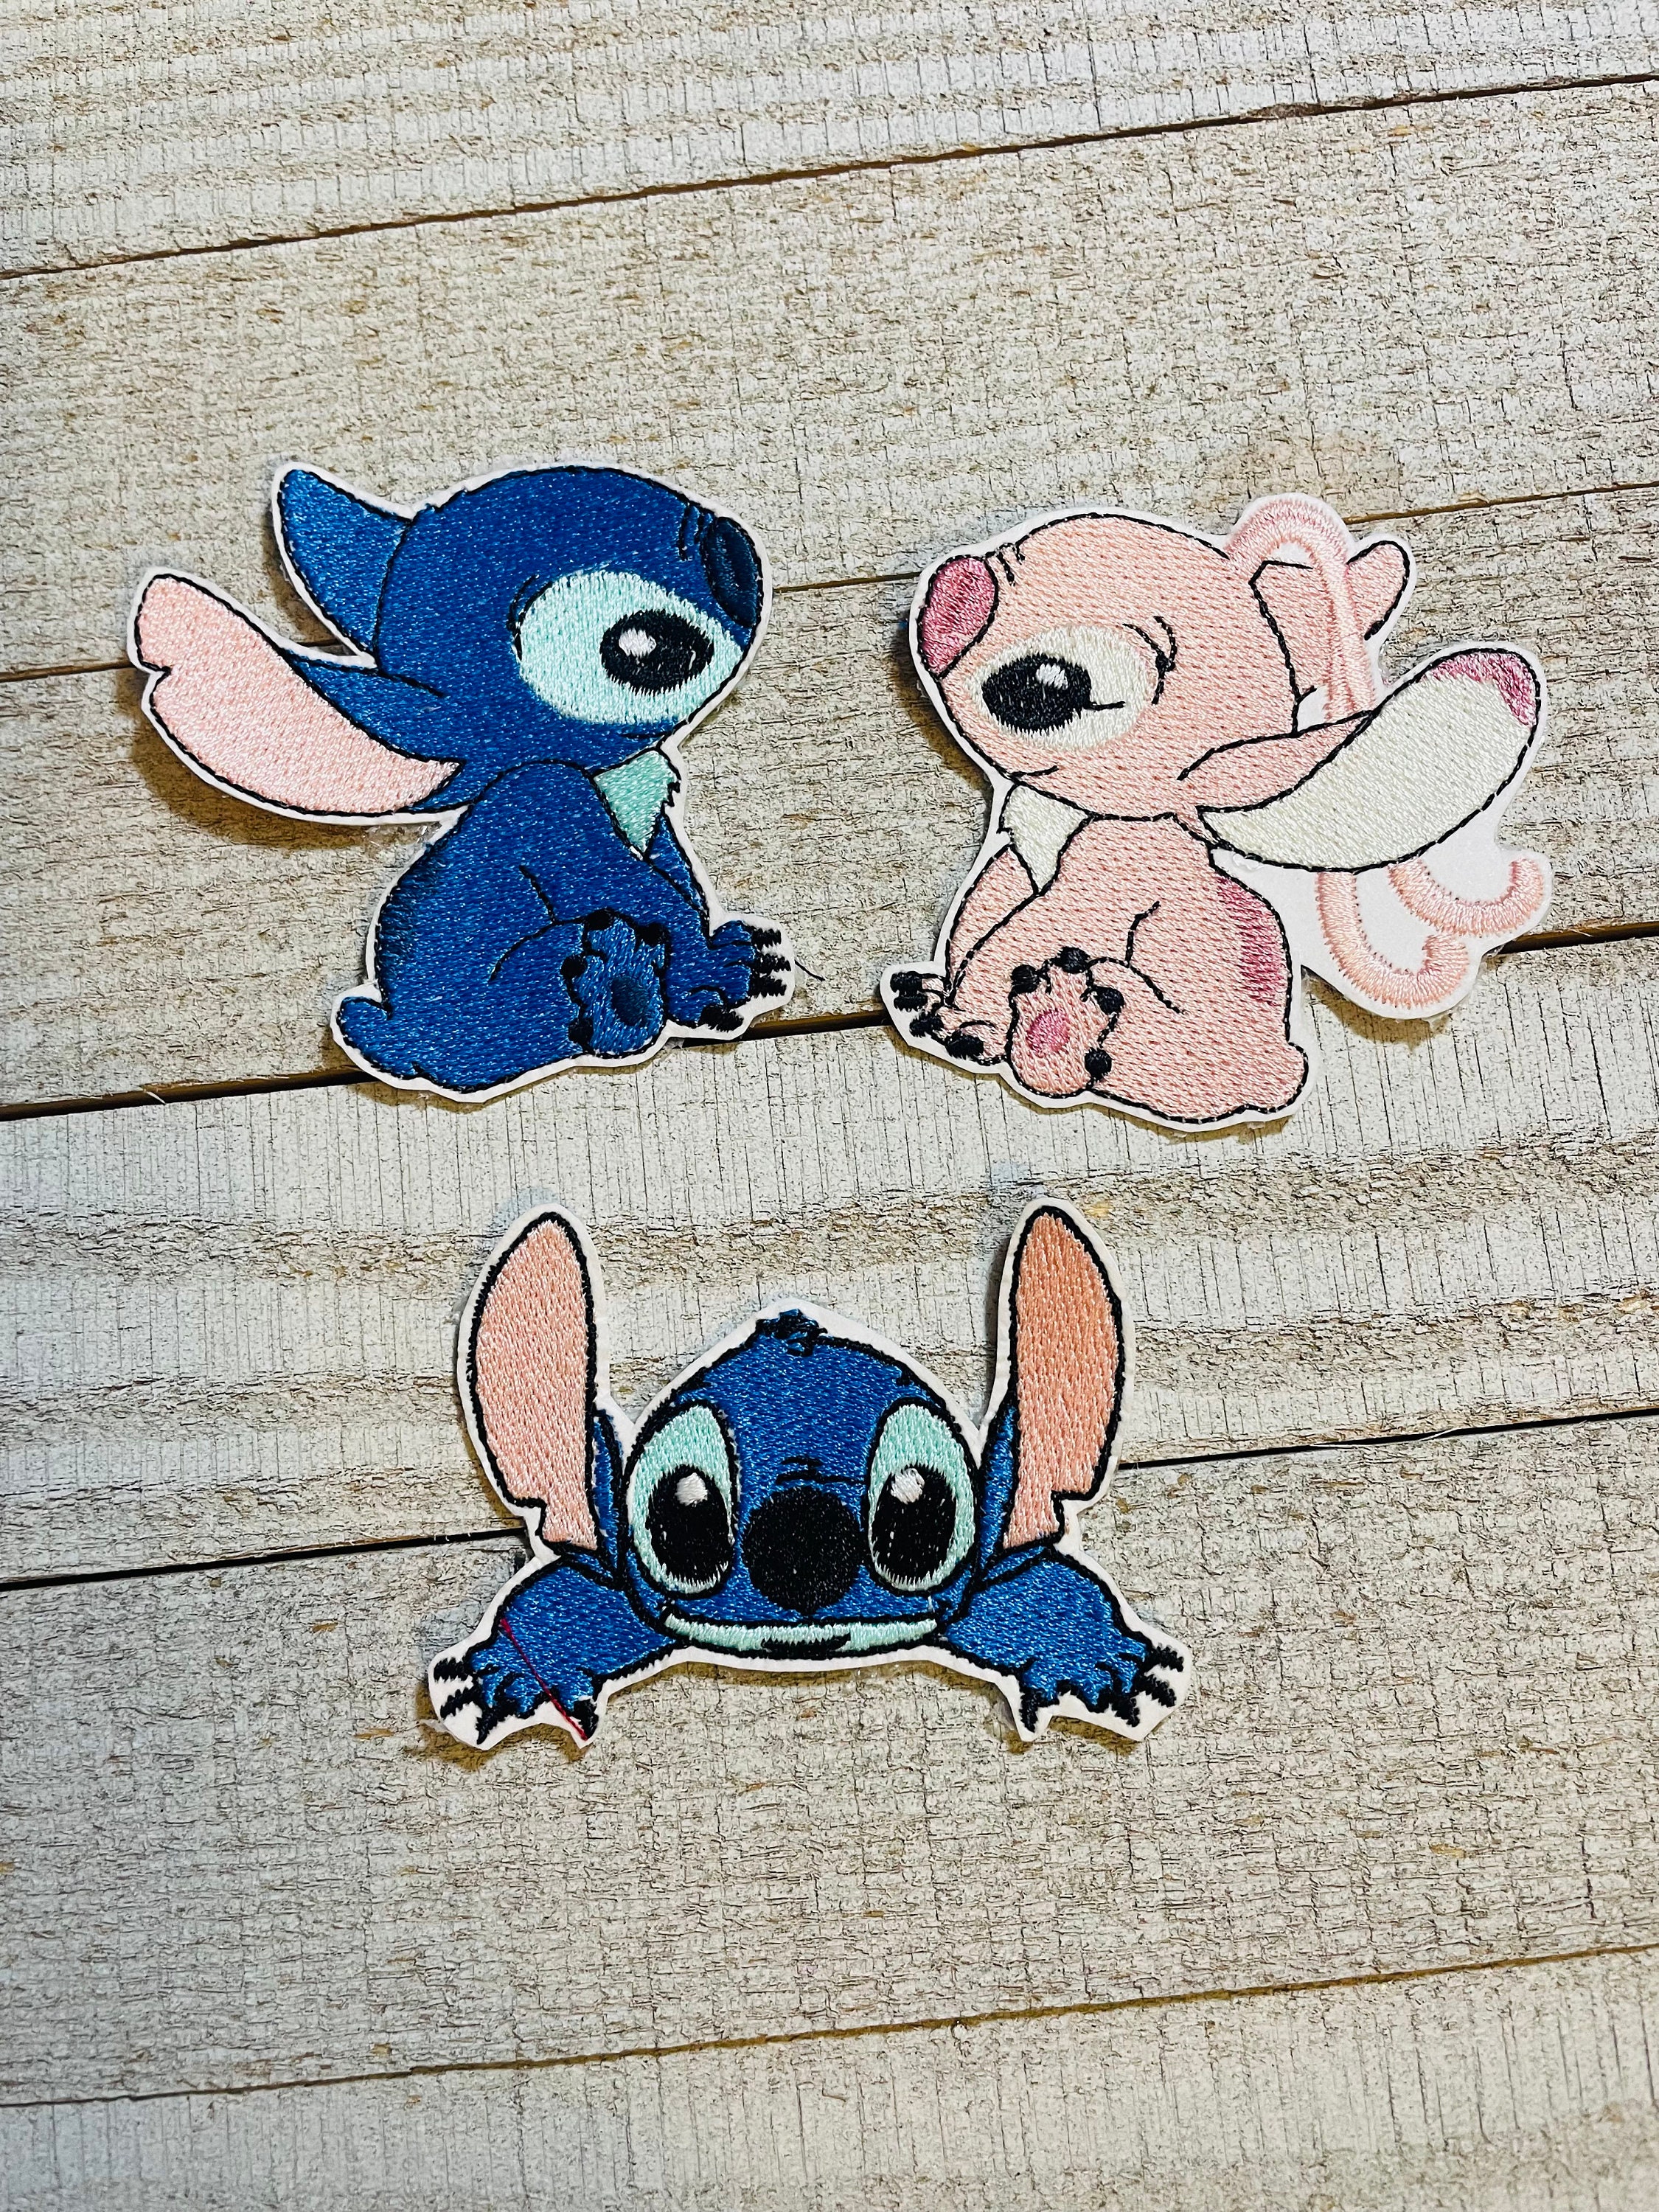 Lilo And Stitch Characters 3 Inches Tall Embroidered Iron On Patch 